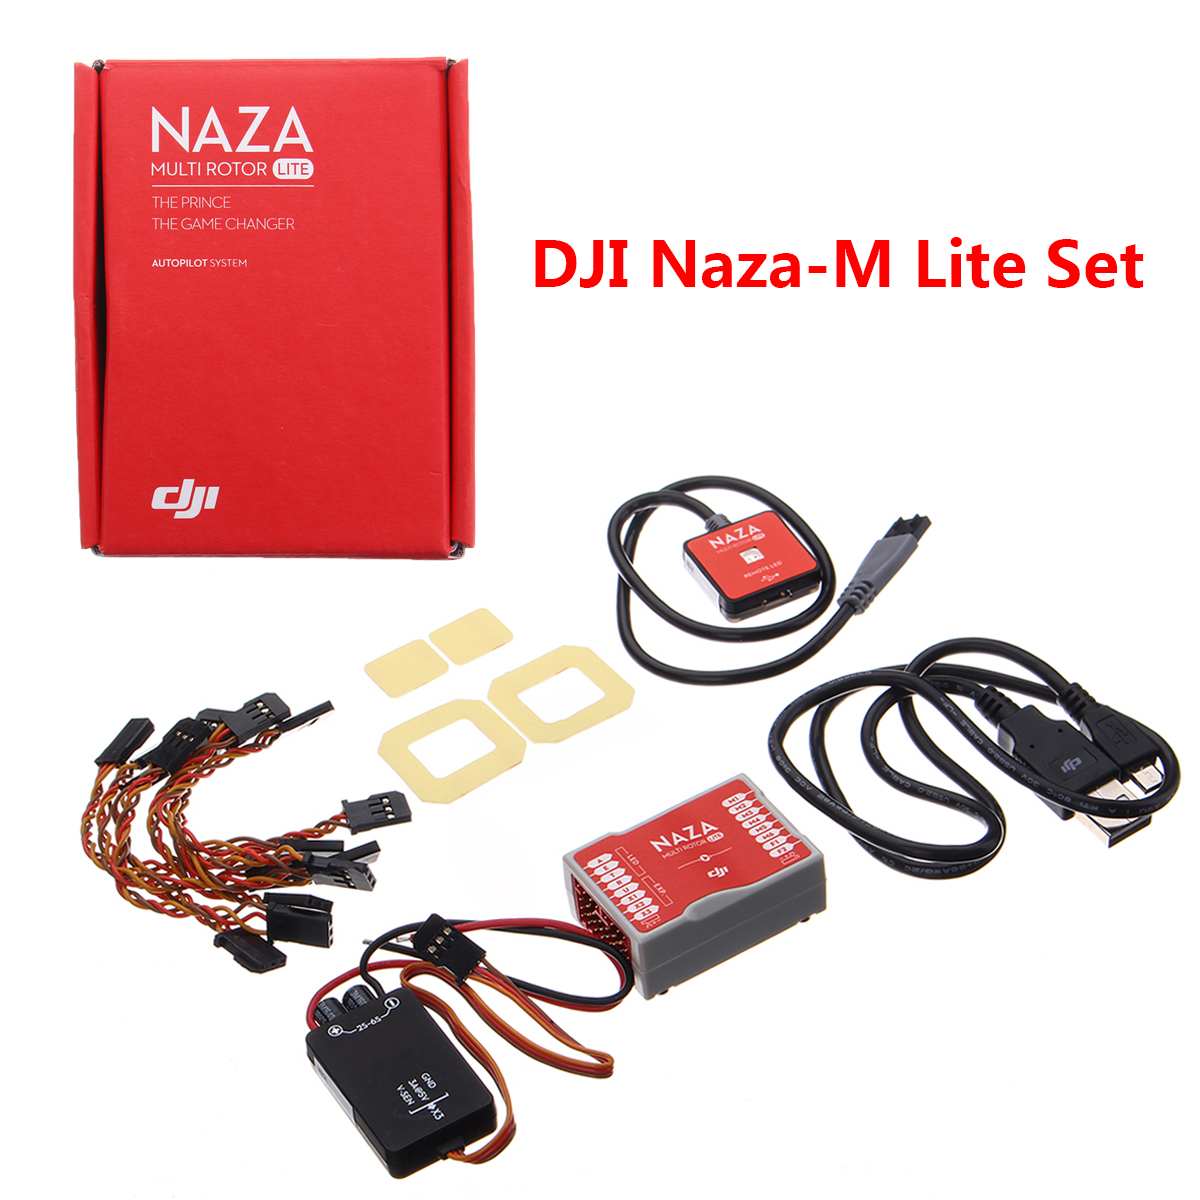 Voor Dji Naza M Lite Flight Controller Sets Multi-Rotor Vlucht (Automatische) control Combo Voor Rc Systeem Quadcopter Accessorie Kits